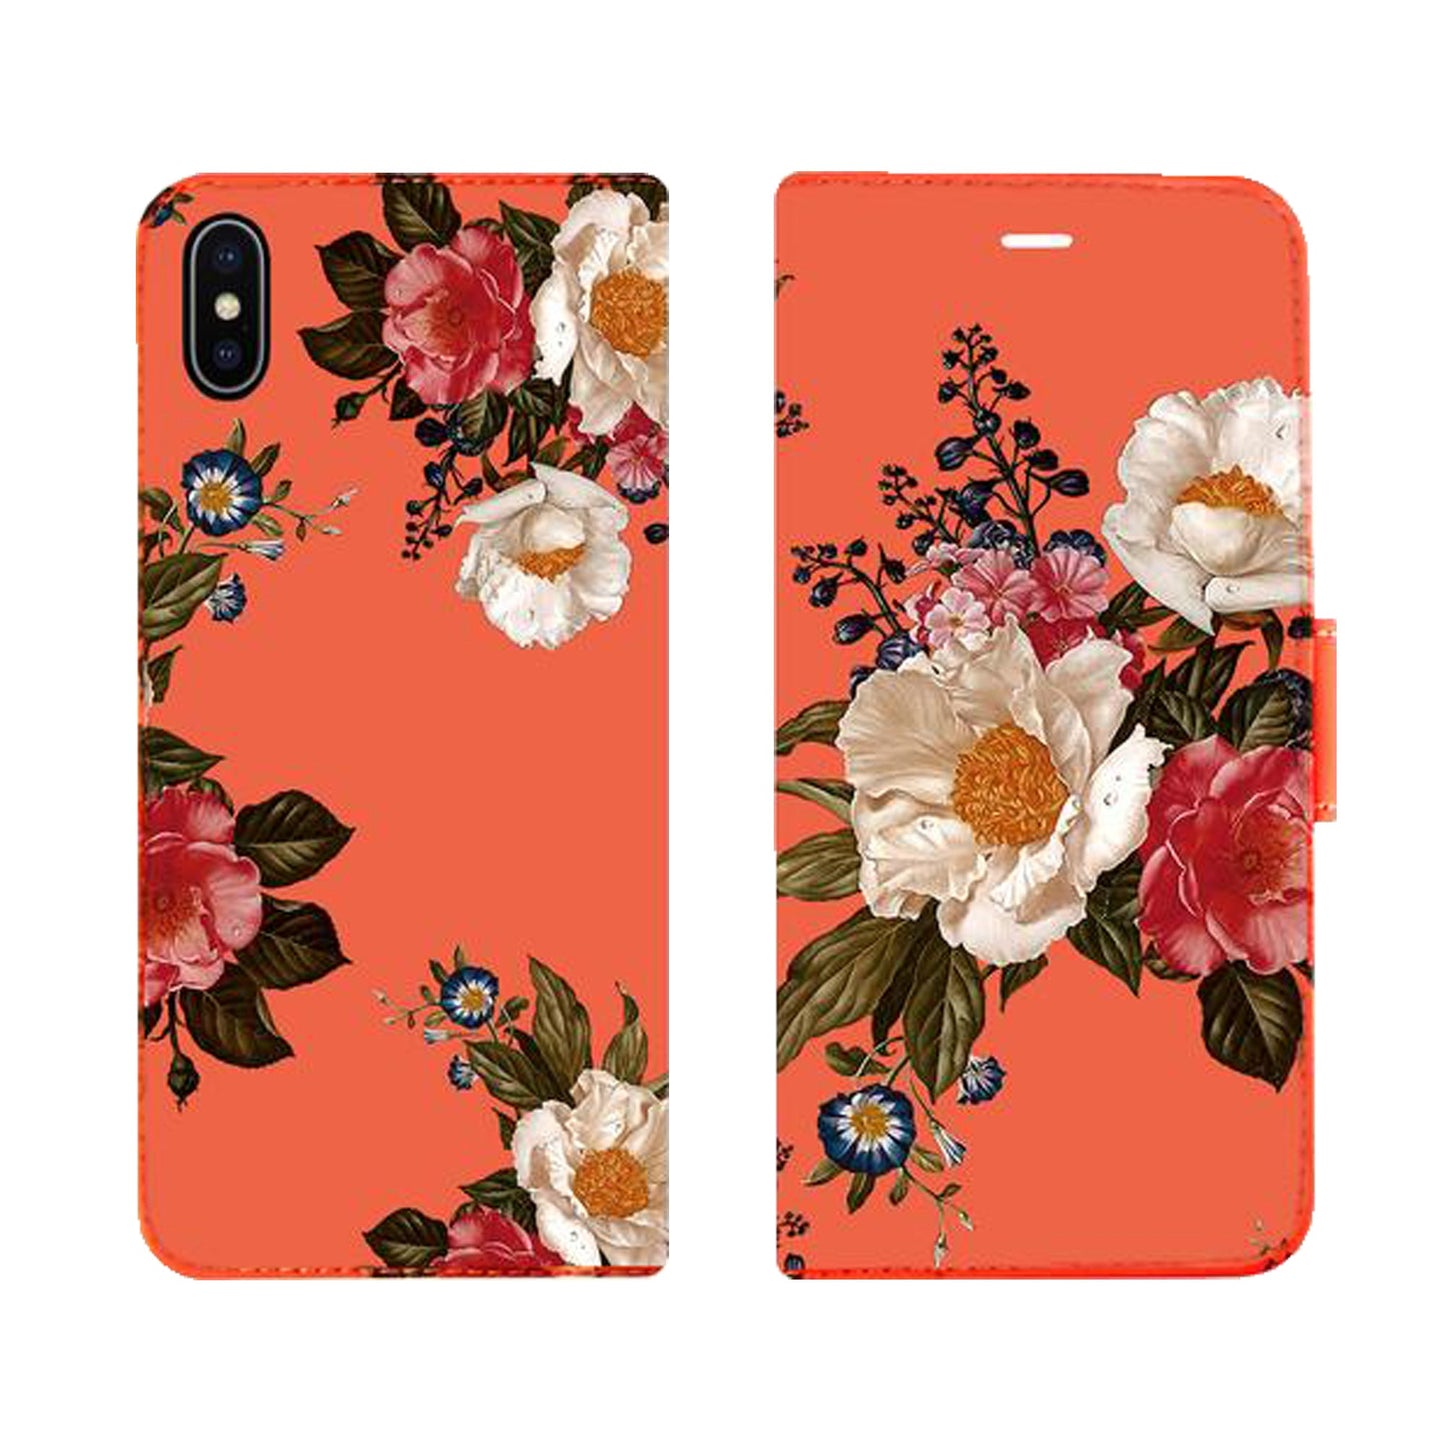 Flowers on Red Victor Case for iPhone X/XS